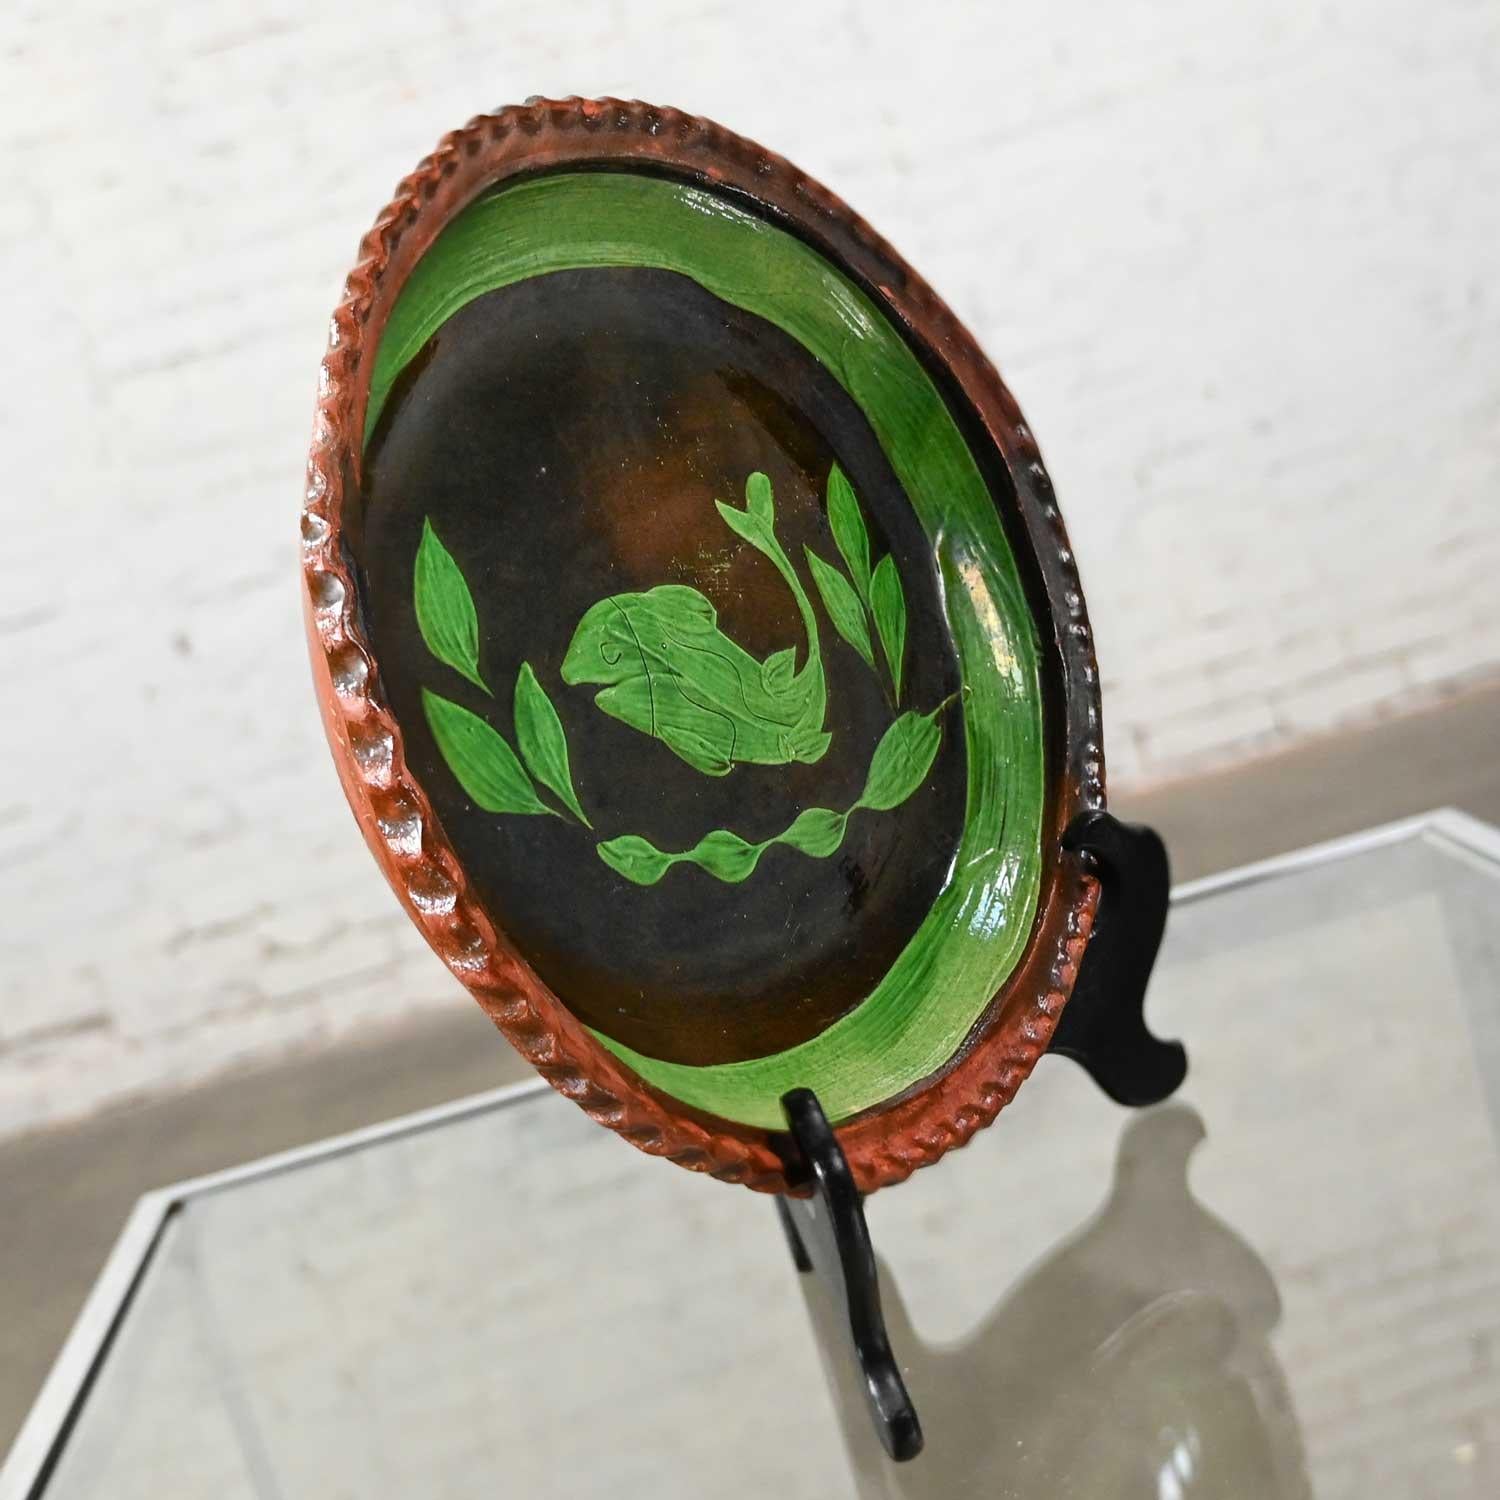 Mexican Patamban Hand Painted Fish Design Folk Art Green & Brown Glazed Platter In Good Condition For Sale In Topeka, KS